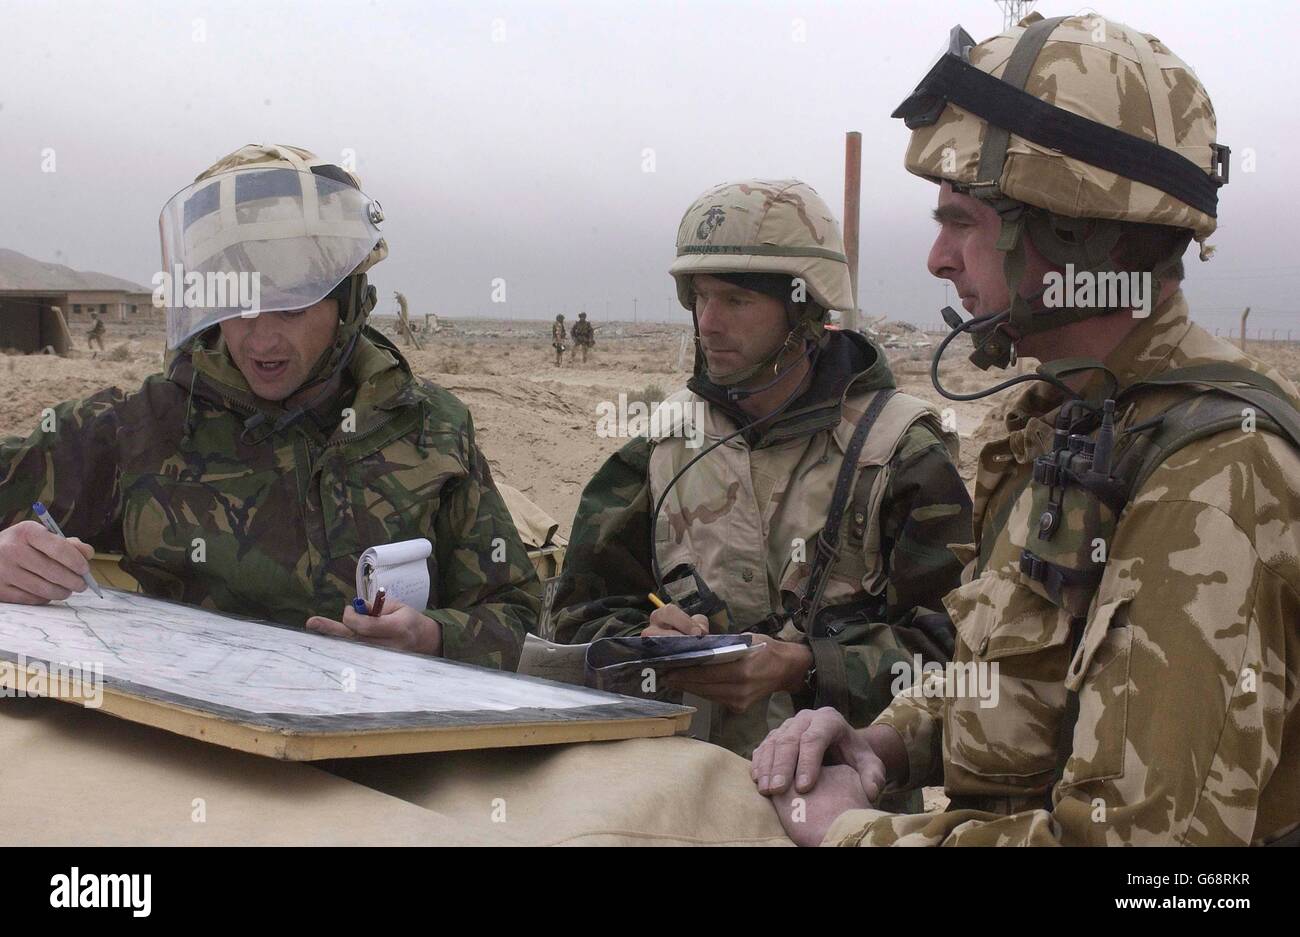 (l/r) Flight Leautenant Chris Long, of 5131 Bomb Disposal Squadron, based at RAF Wittering, briefs his American counterpart as well as Wing Commander Mark Driver, OC 4 Tac STO (Tactical Survive-to-Operate) Squadron, about the risks of unexploded munitions left behind by coalition bombing. The group are preparing to move further into Iraq, setting up forward operating bases for coalition helicopter operations. Stock Photo